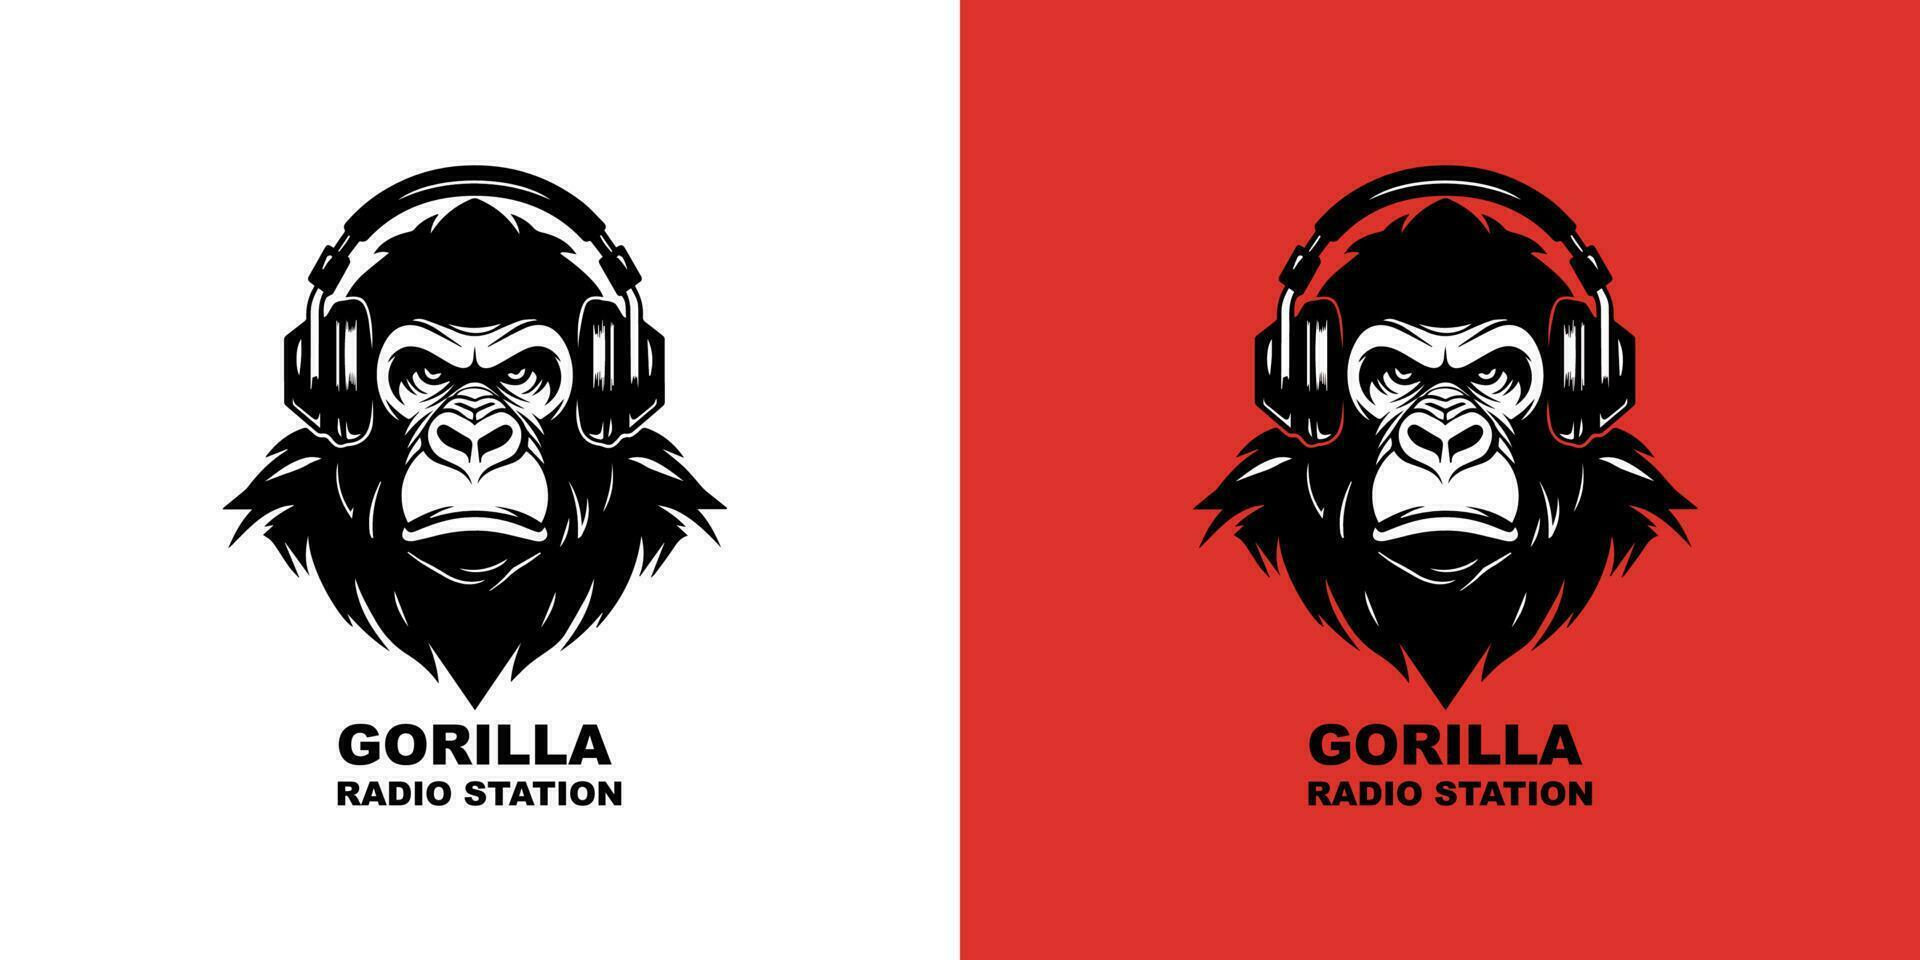 A gorilla wearing headphones vector logotype on red and white background. Logo mark